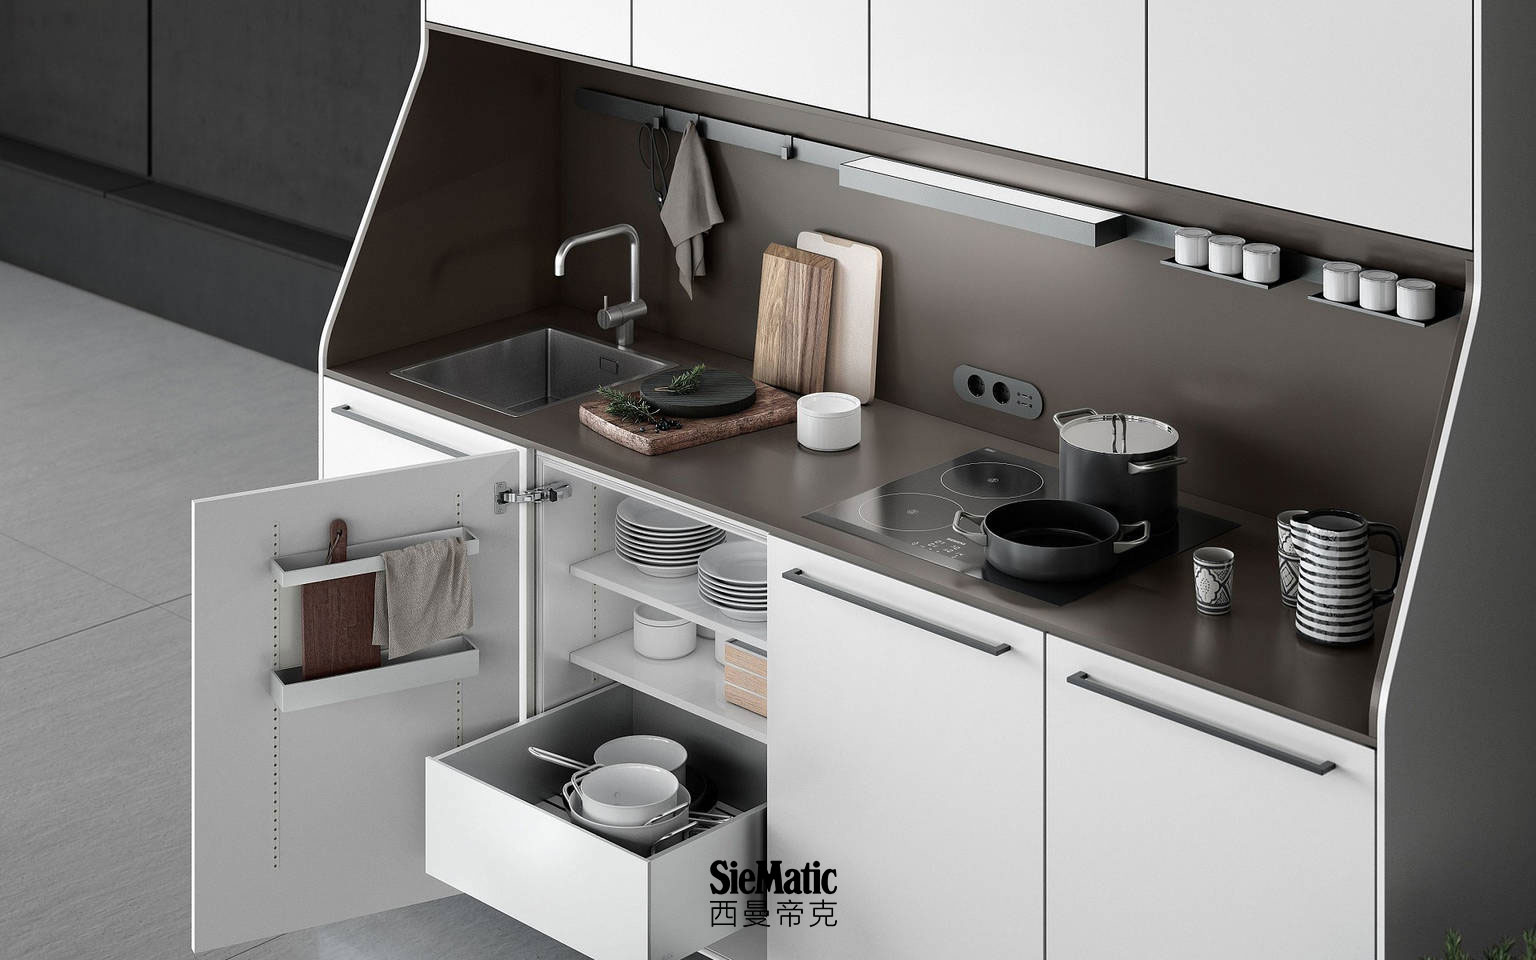 High-quality countertop designs available for the SieMatic 29 kitchen sideboard from the Urban style collection